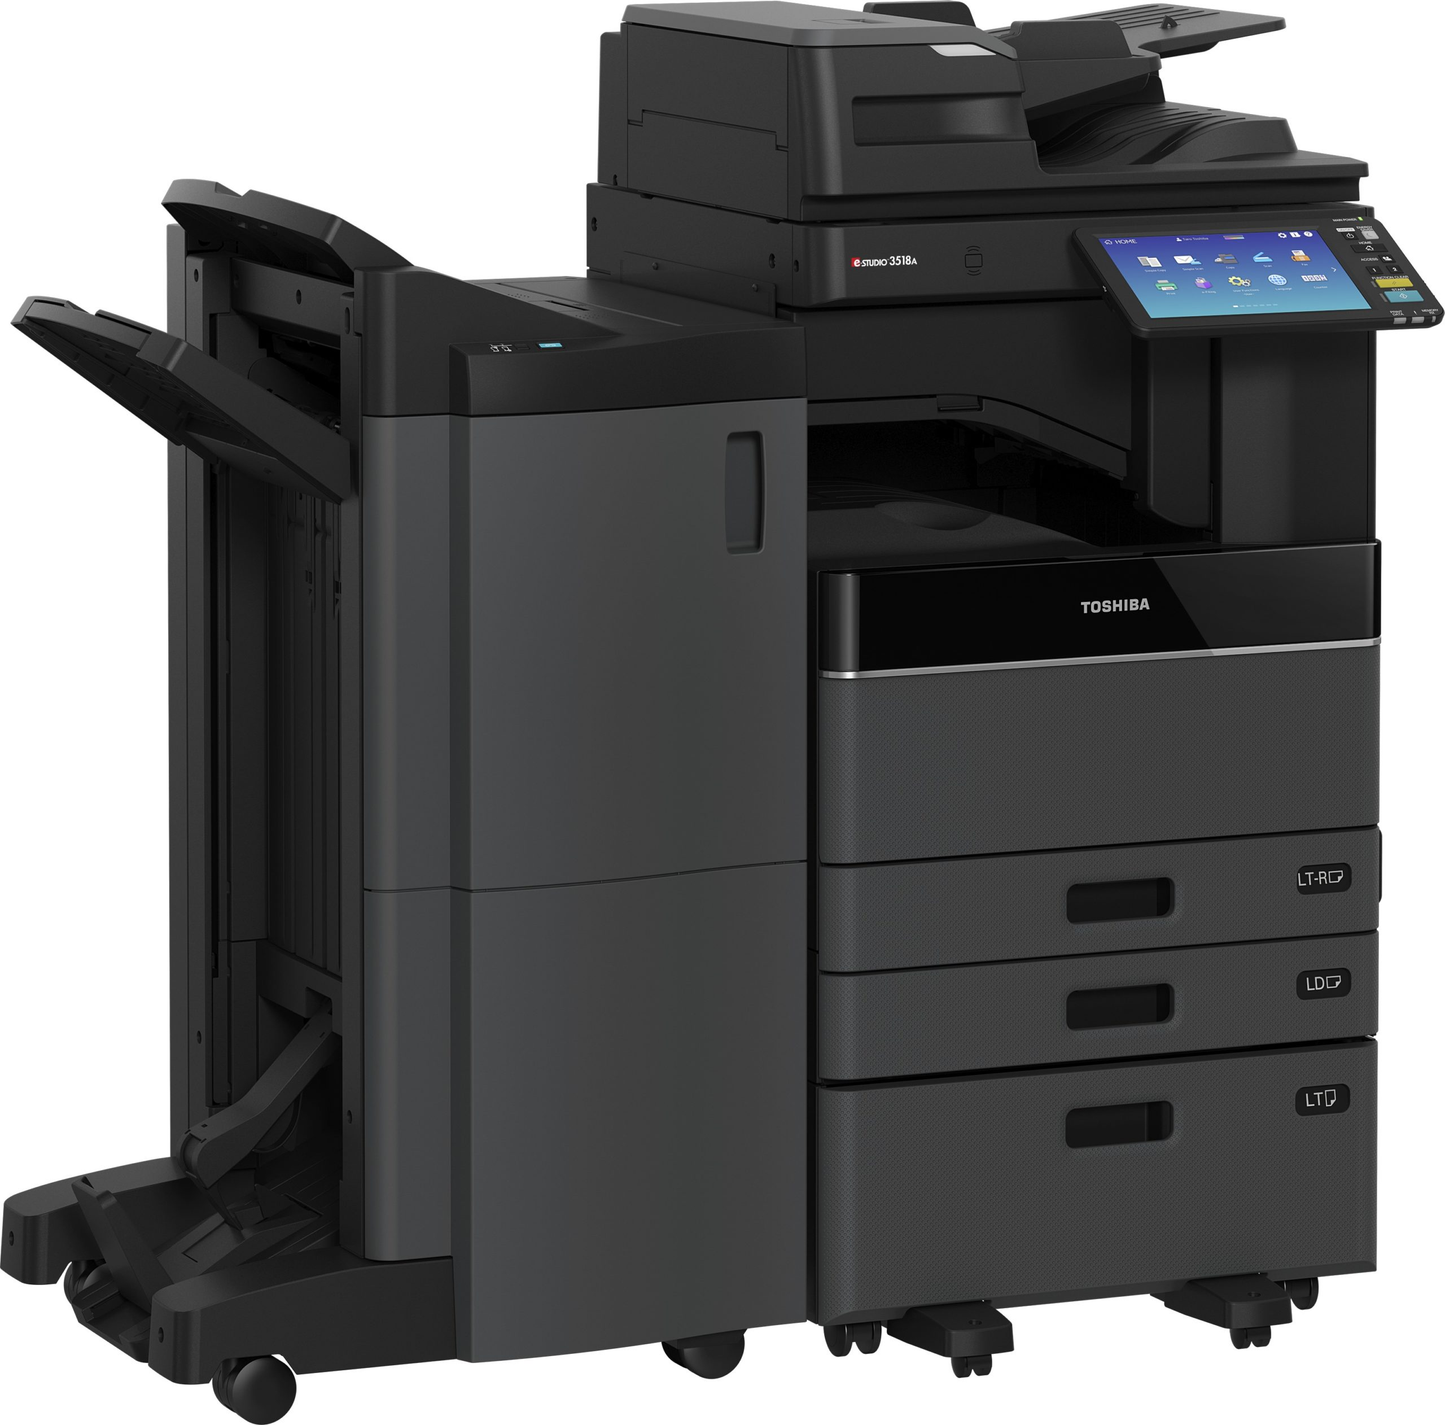 Toshiba E-STUDIO 2018A (Meter and prices depending on availability) Off Lease Printer